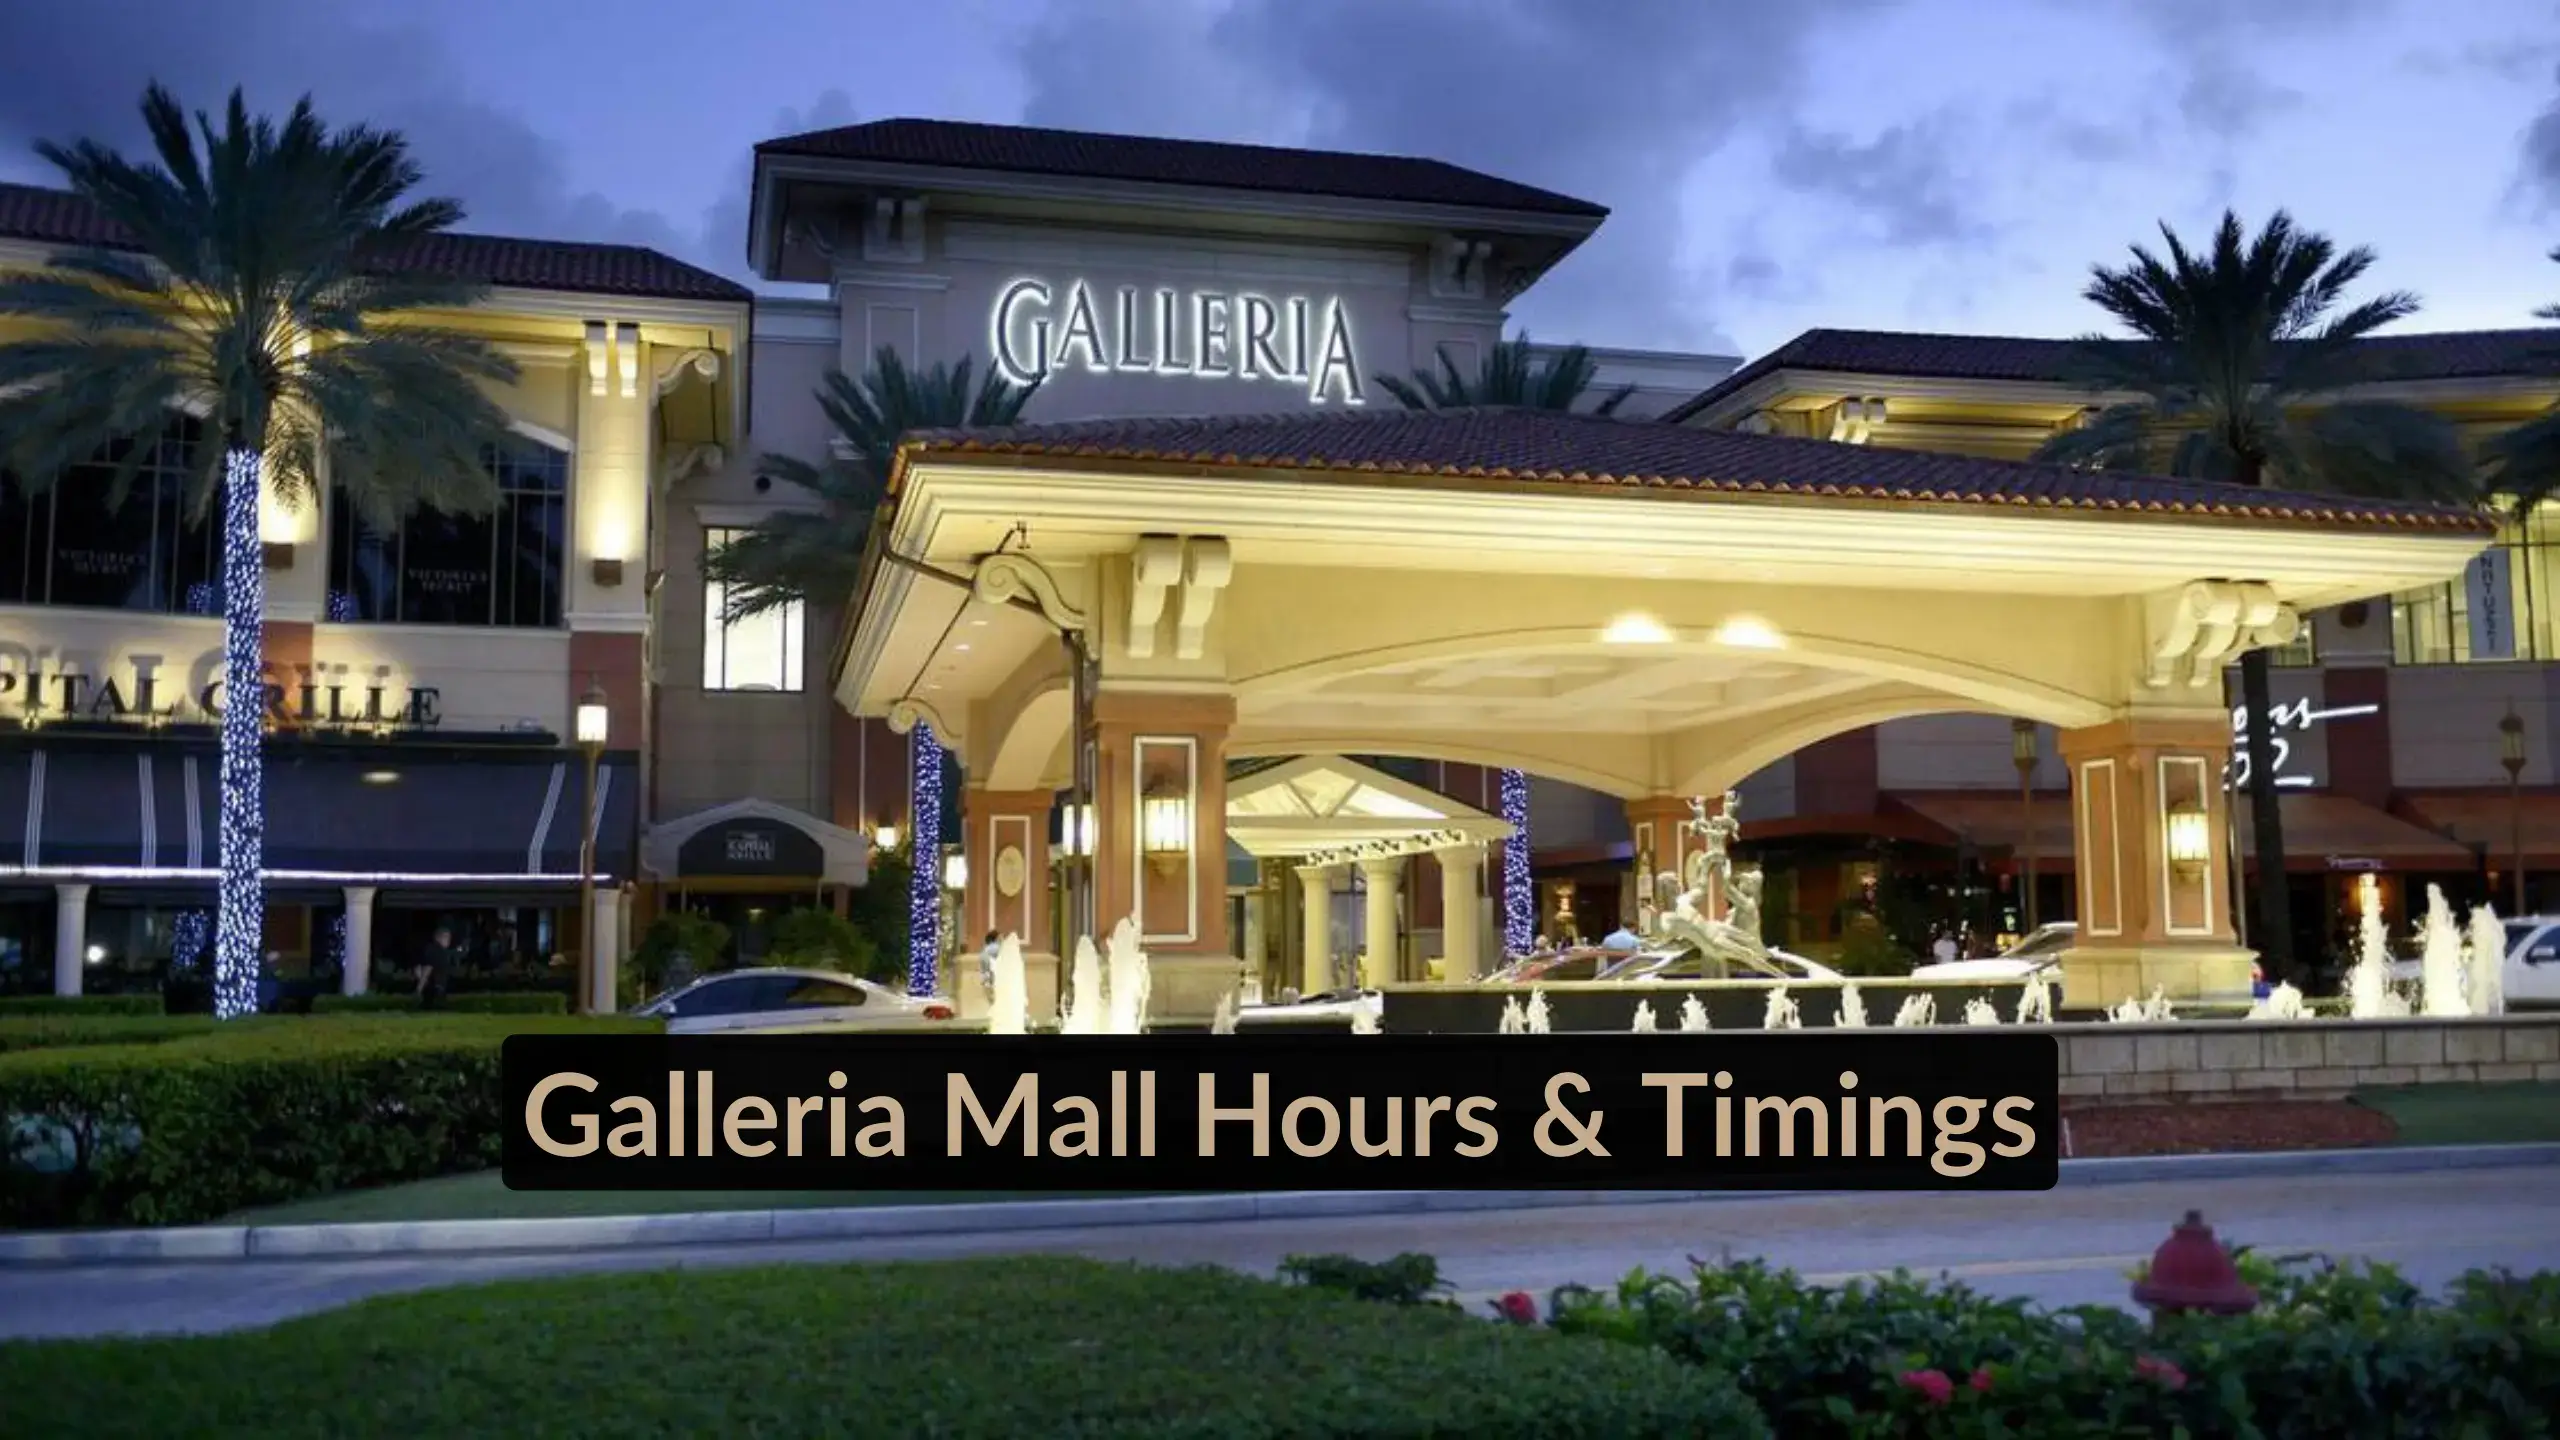 Discover Galleria Mall hours for a seamless shopping experience. From opening times to special events, plan your visit with ease at Galleria Malls!